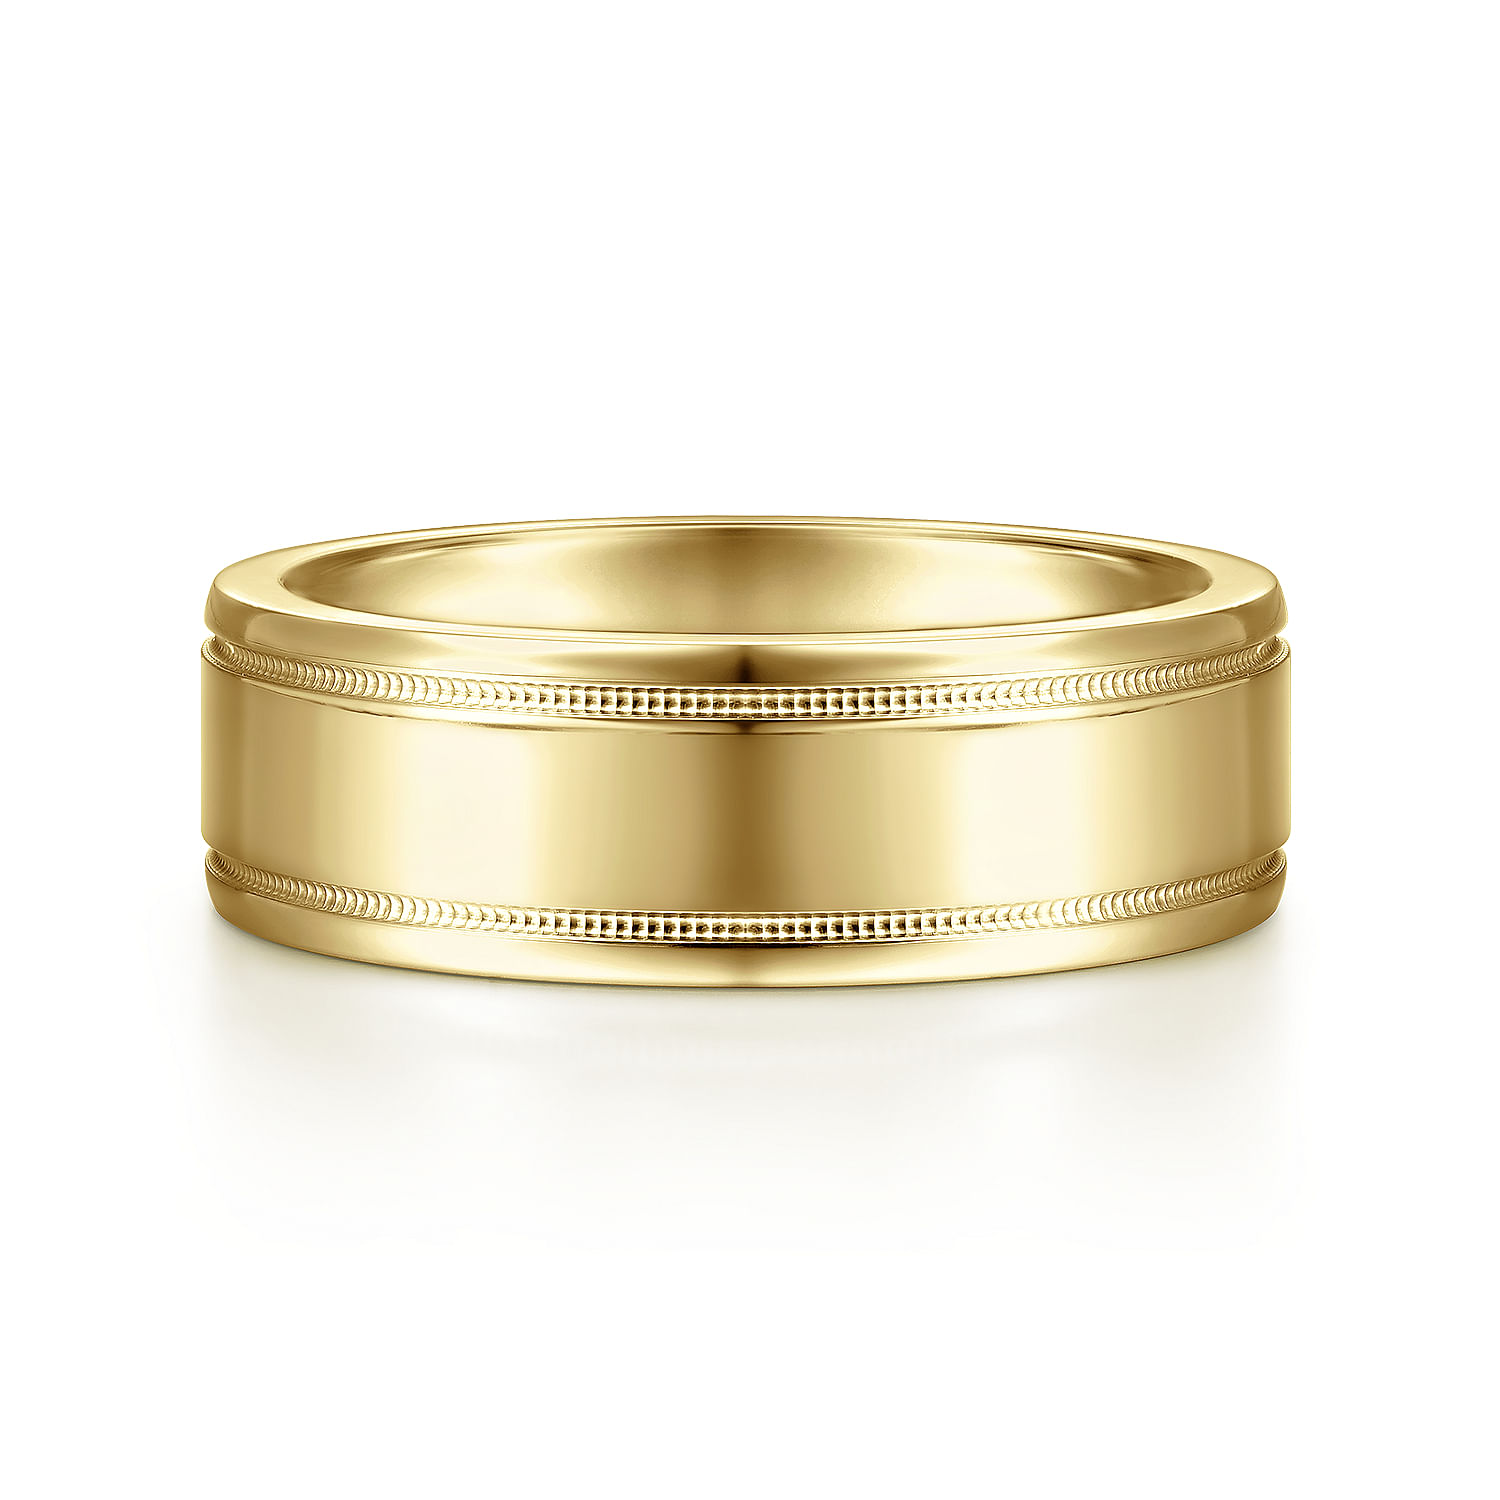 Fred---14K-Yellow-Gold-7mm---High-Polished-Men's-Wedding-Band1